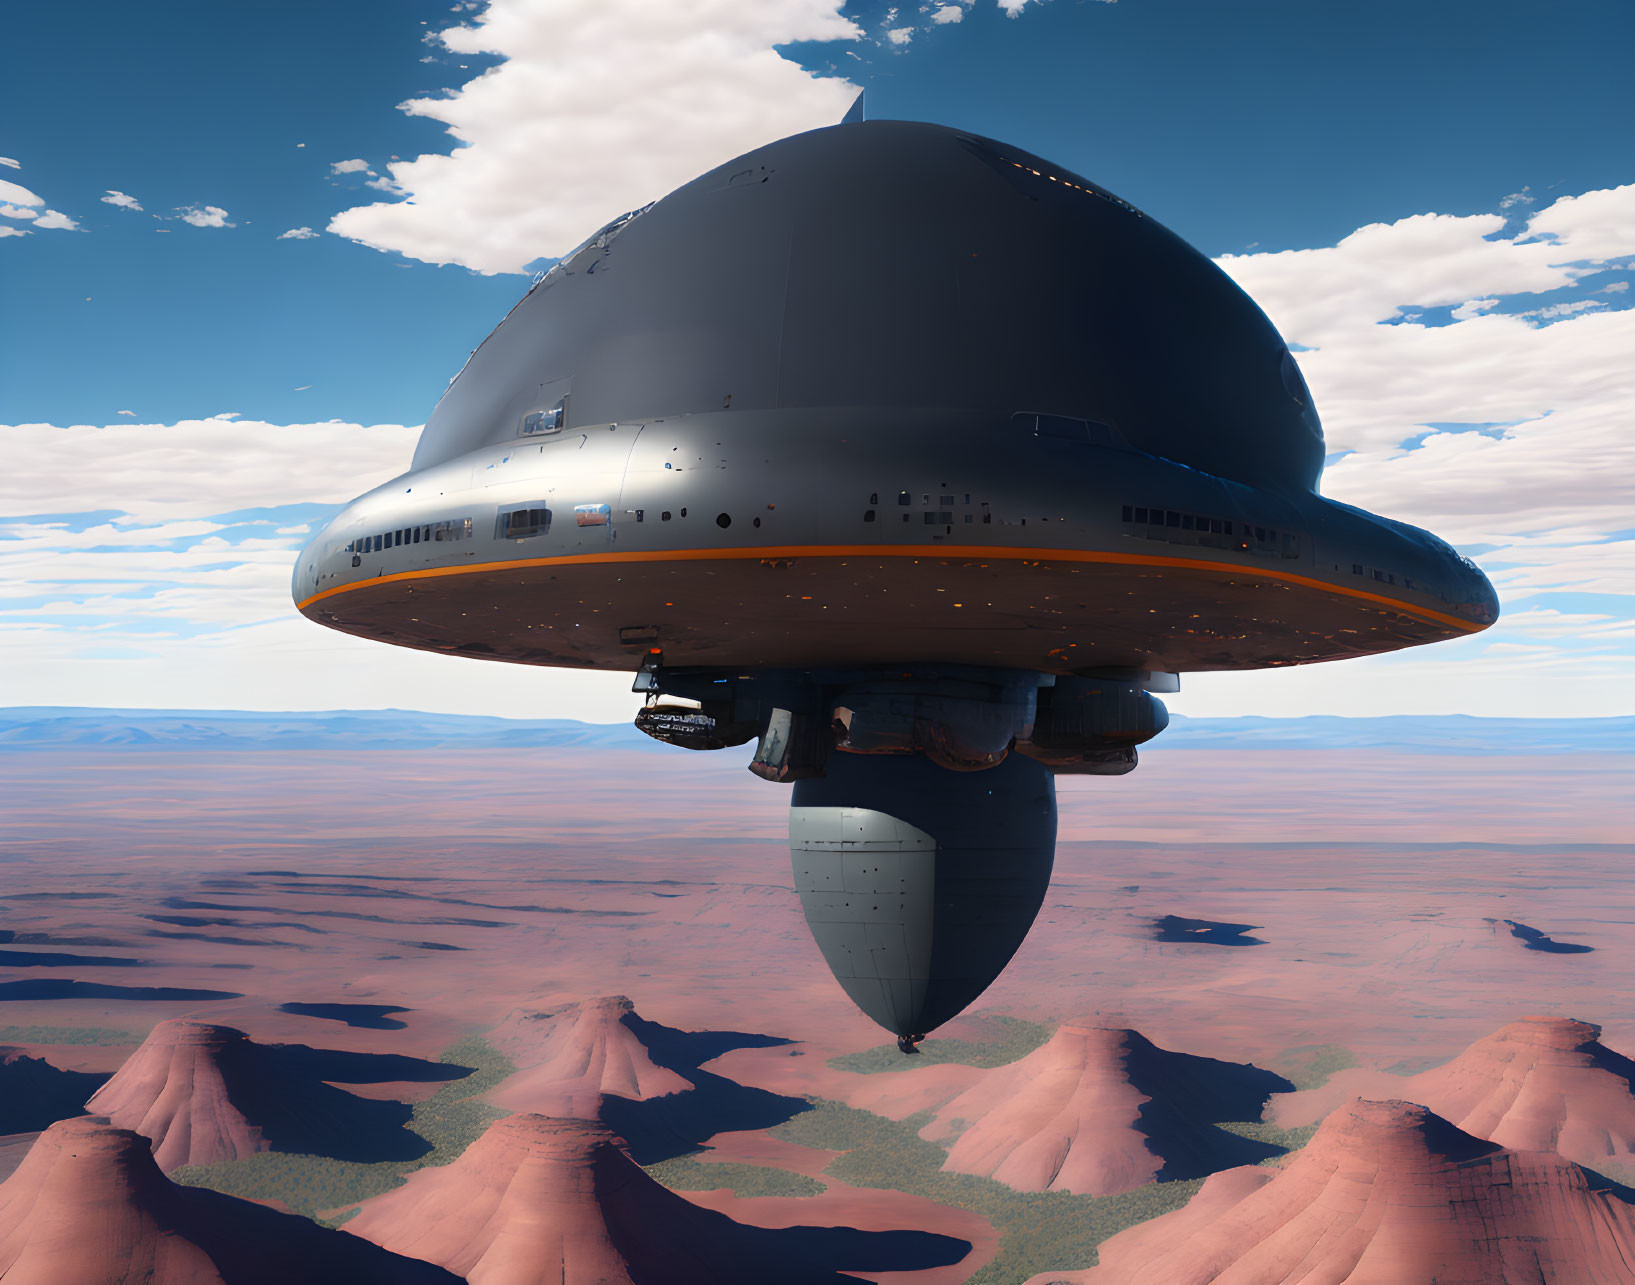 Futuristic spacecraft over desert with red rock formations